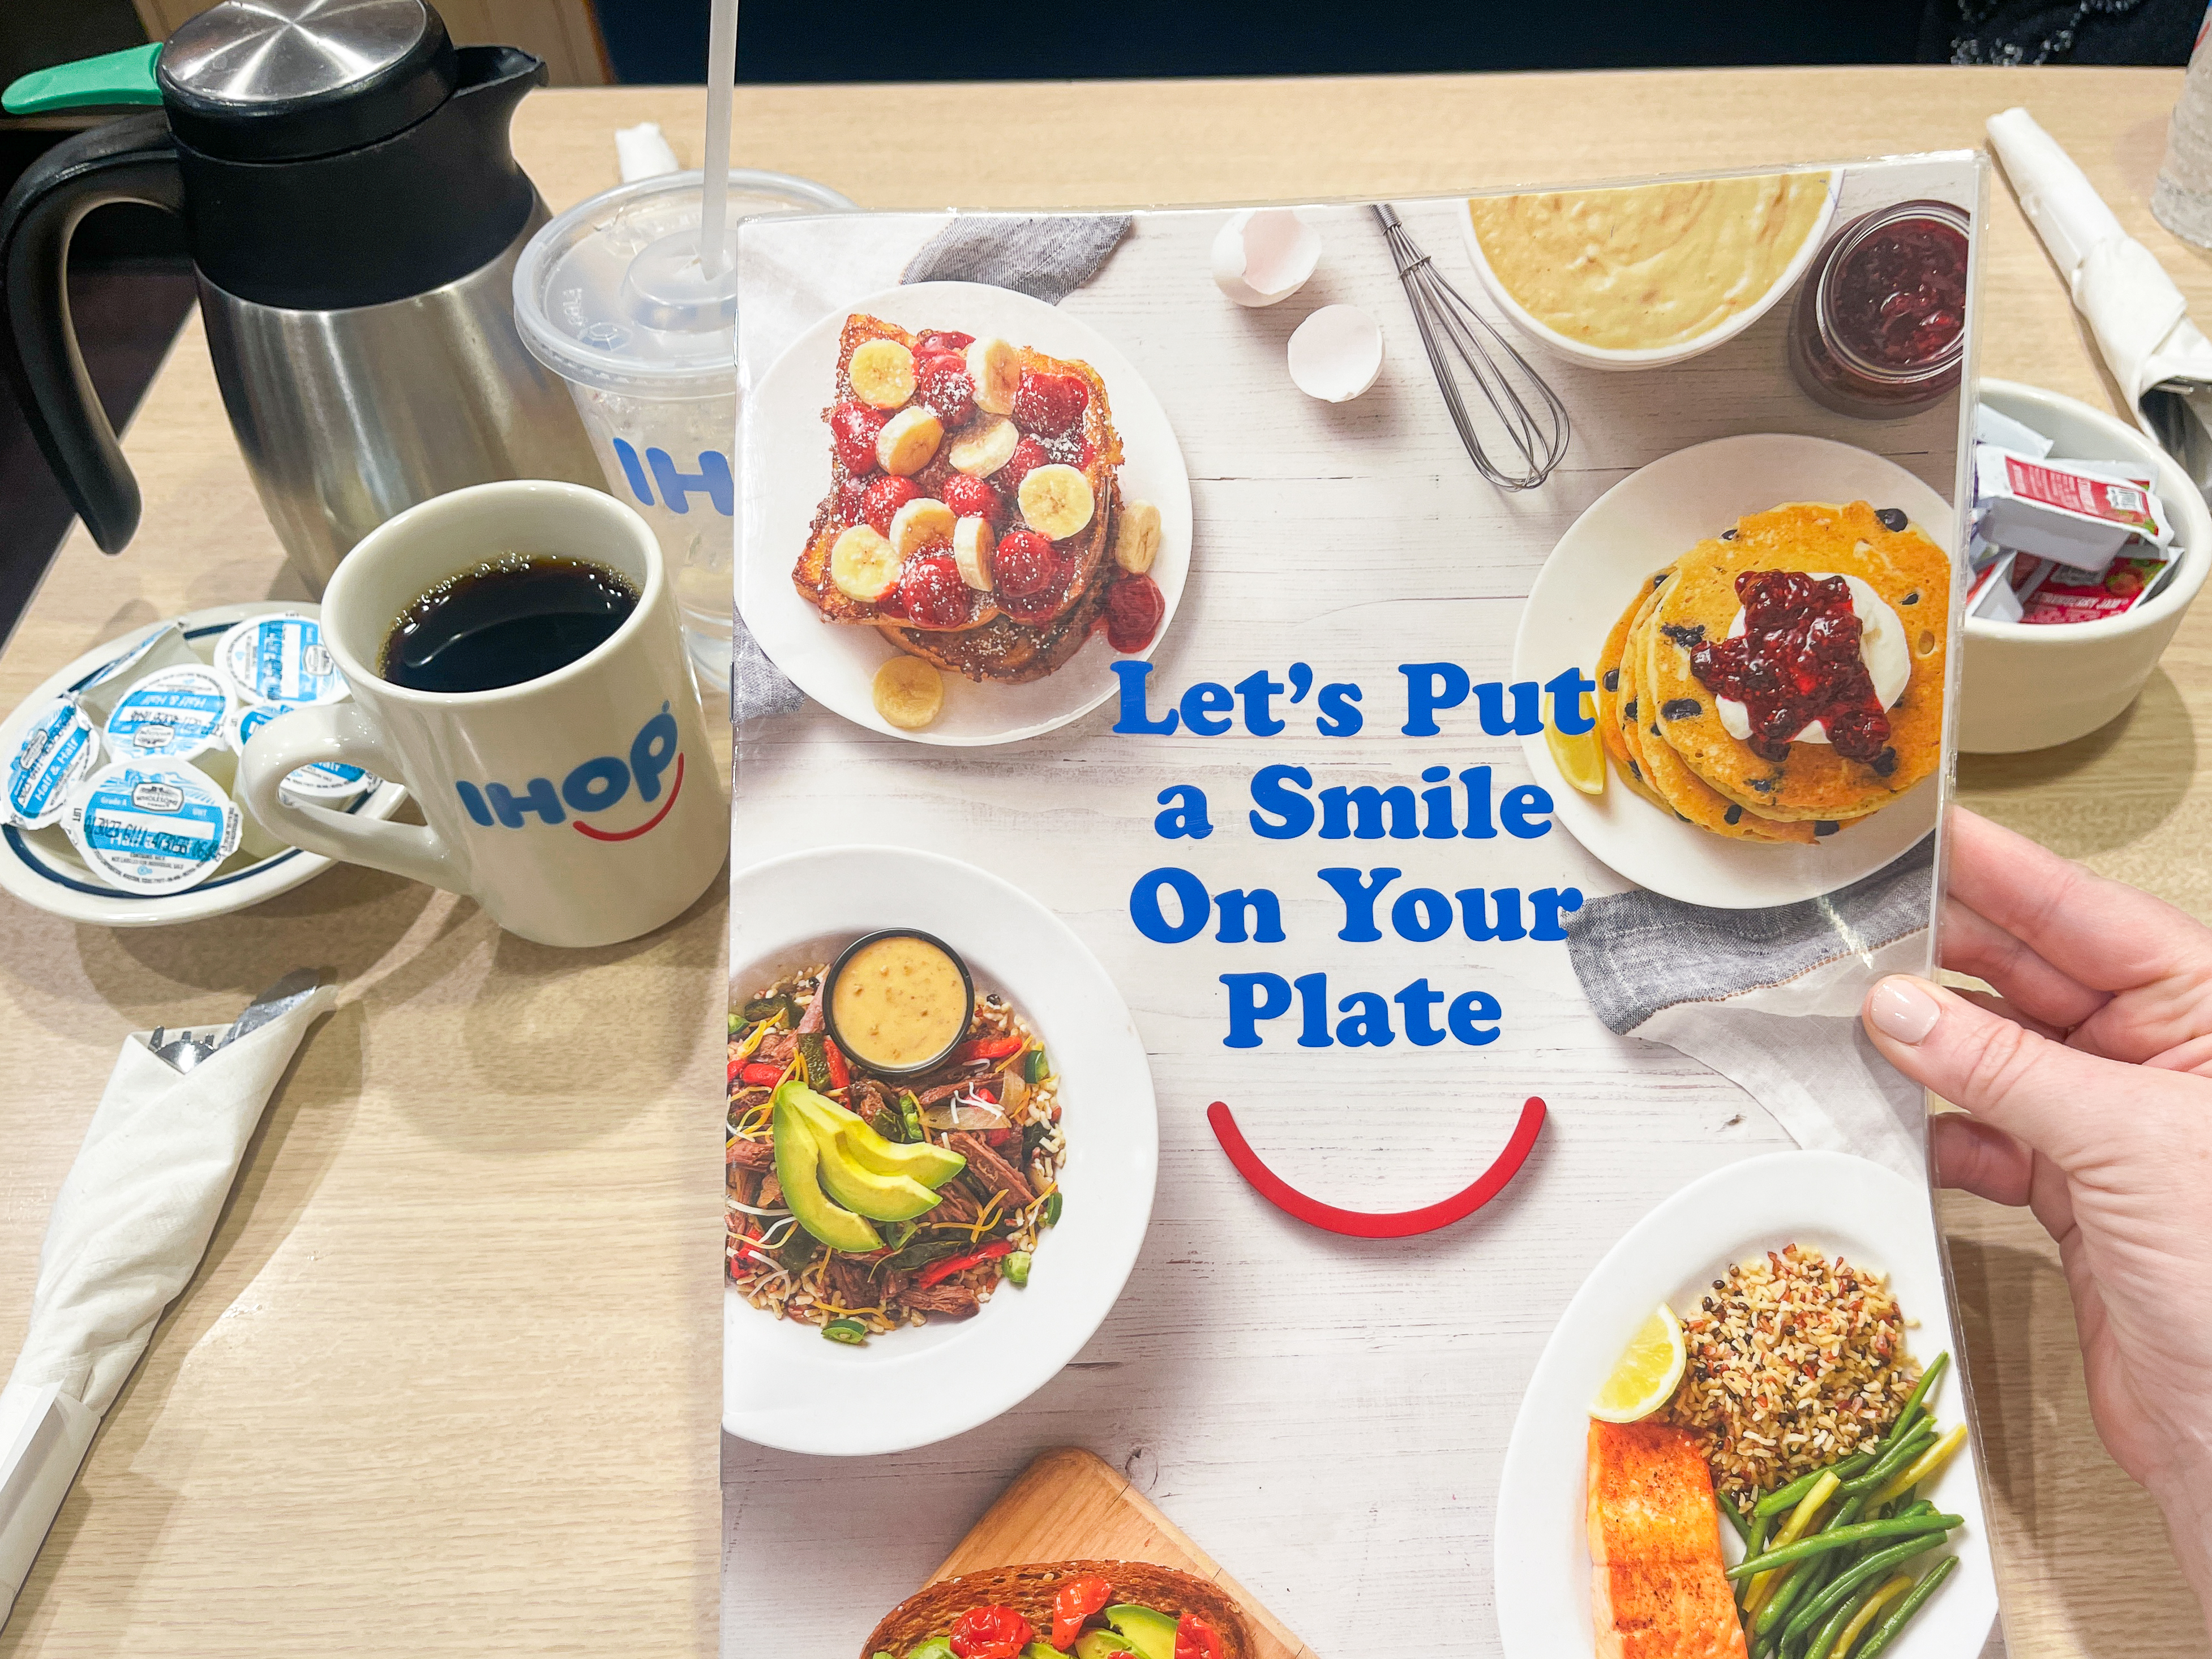 IHOP Restaurant Official MENU NEW 6 page Let's Put a smile on your